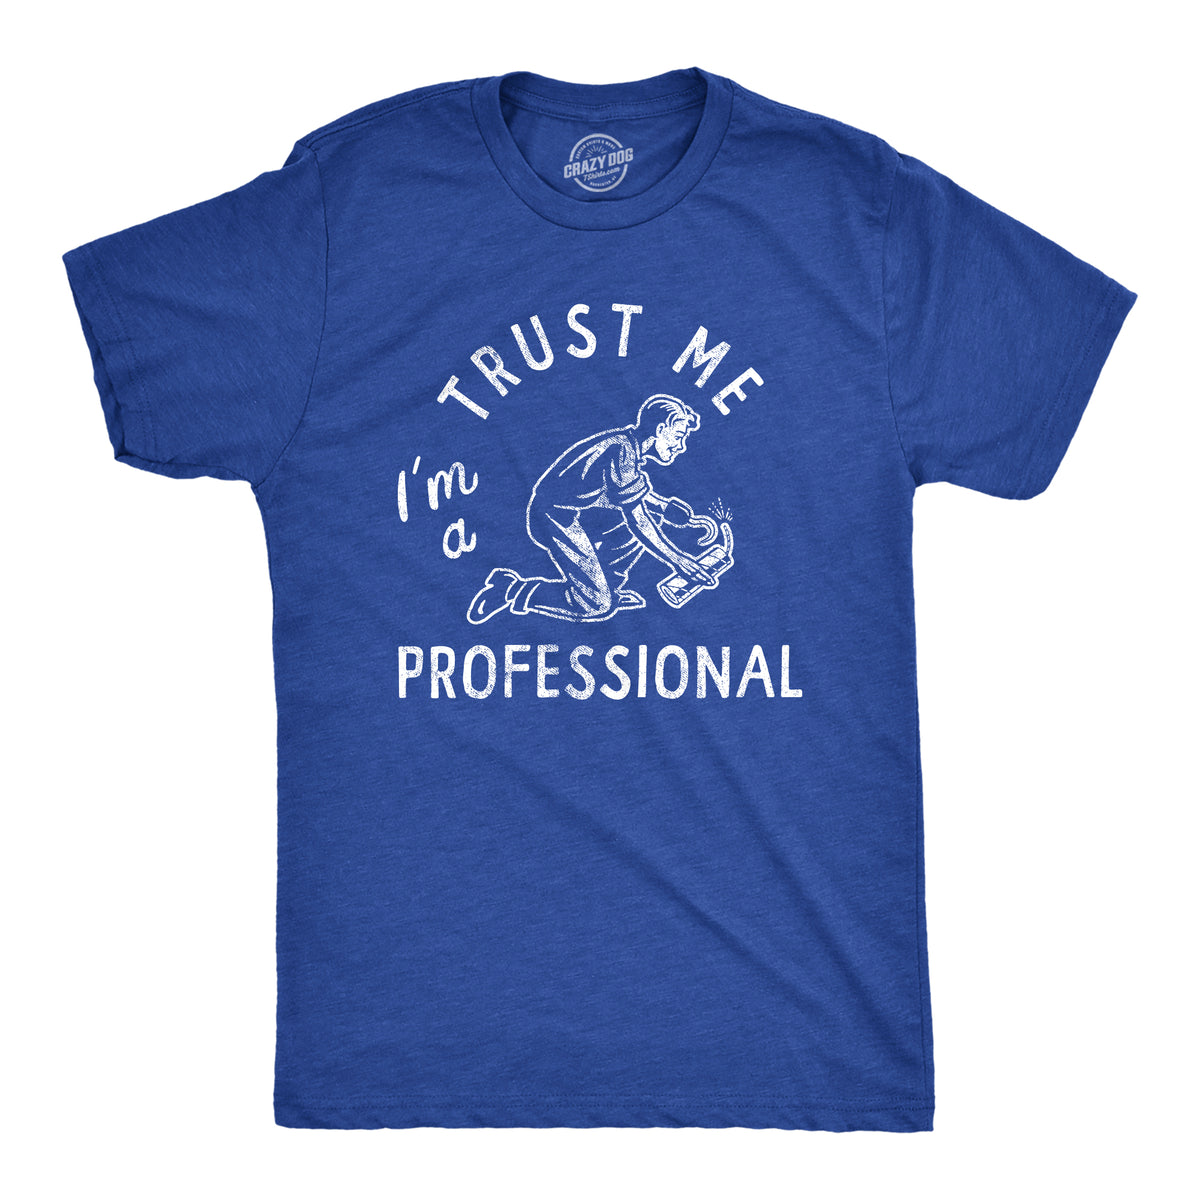 Funny Heather Royal Trust Me Im A Professional Mens T Shirt Nerdy Fourth of July Sarcastic Tee